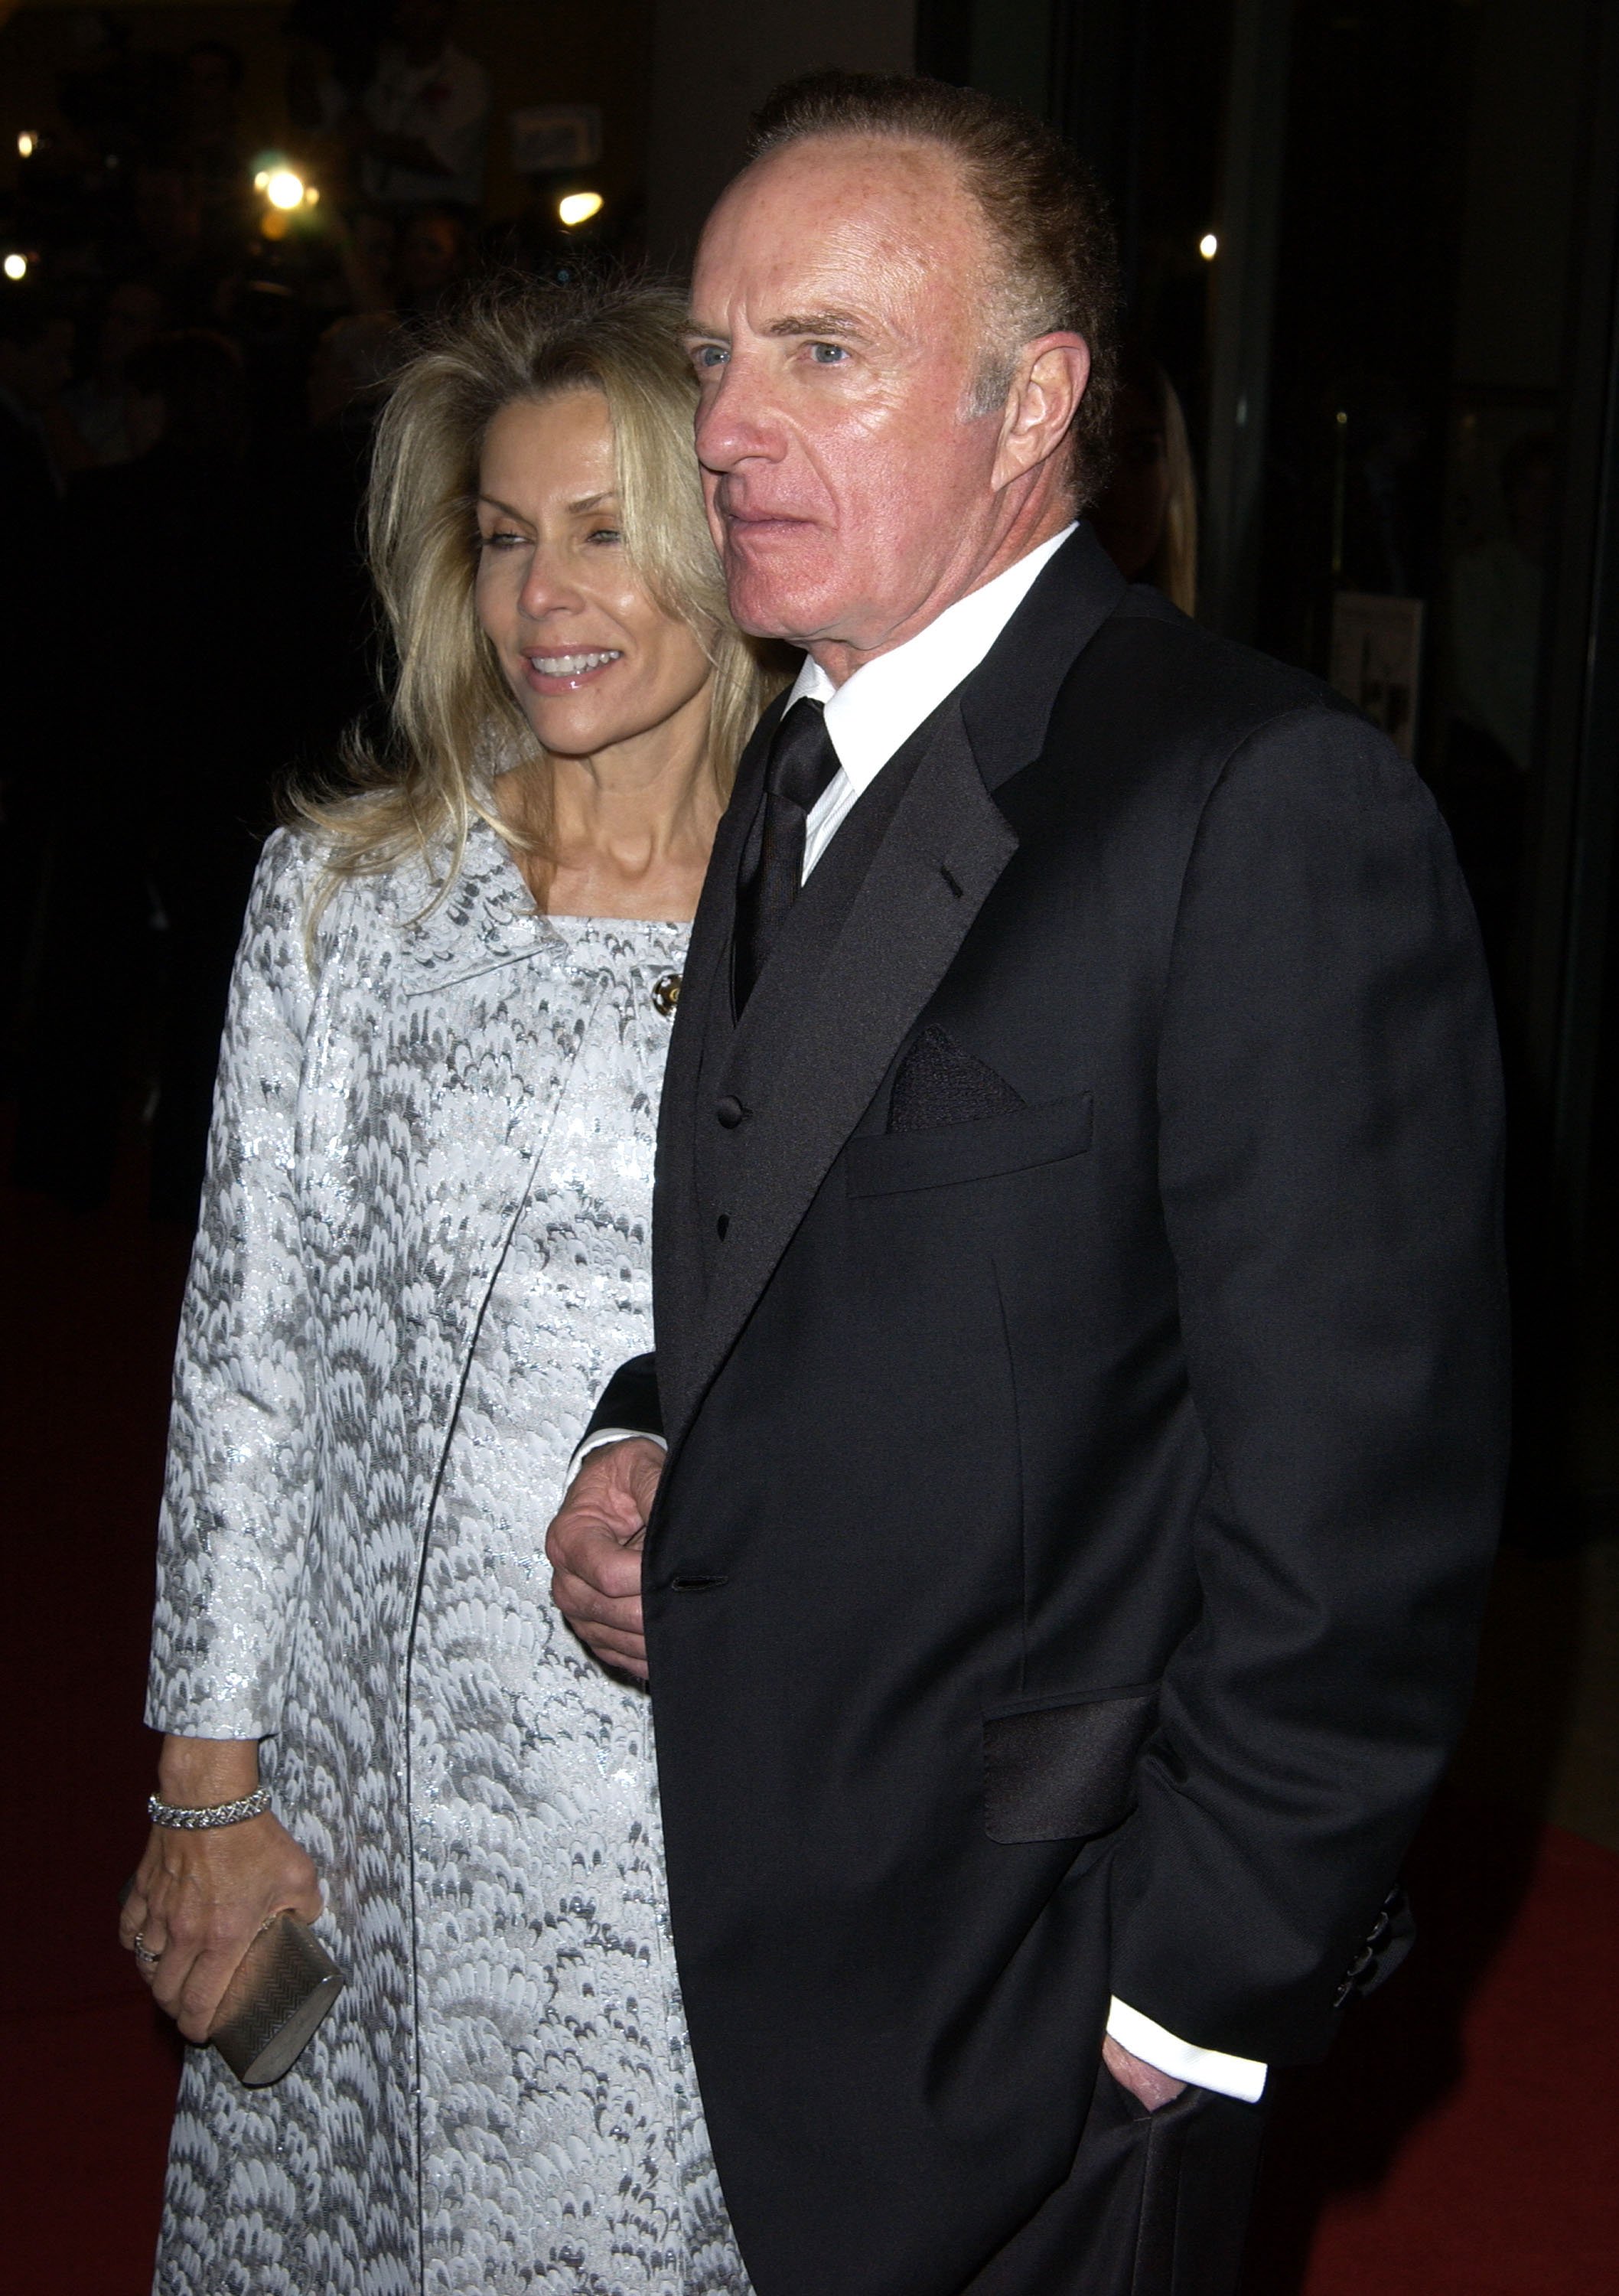 James Caan and Linda Stokes during the 18th Annual American Cinematheque Award - Arrivals and Press Room at Beverly Hilton Hotel in Beverly Hills, California. / Source: Getty Images